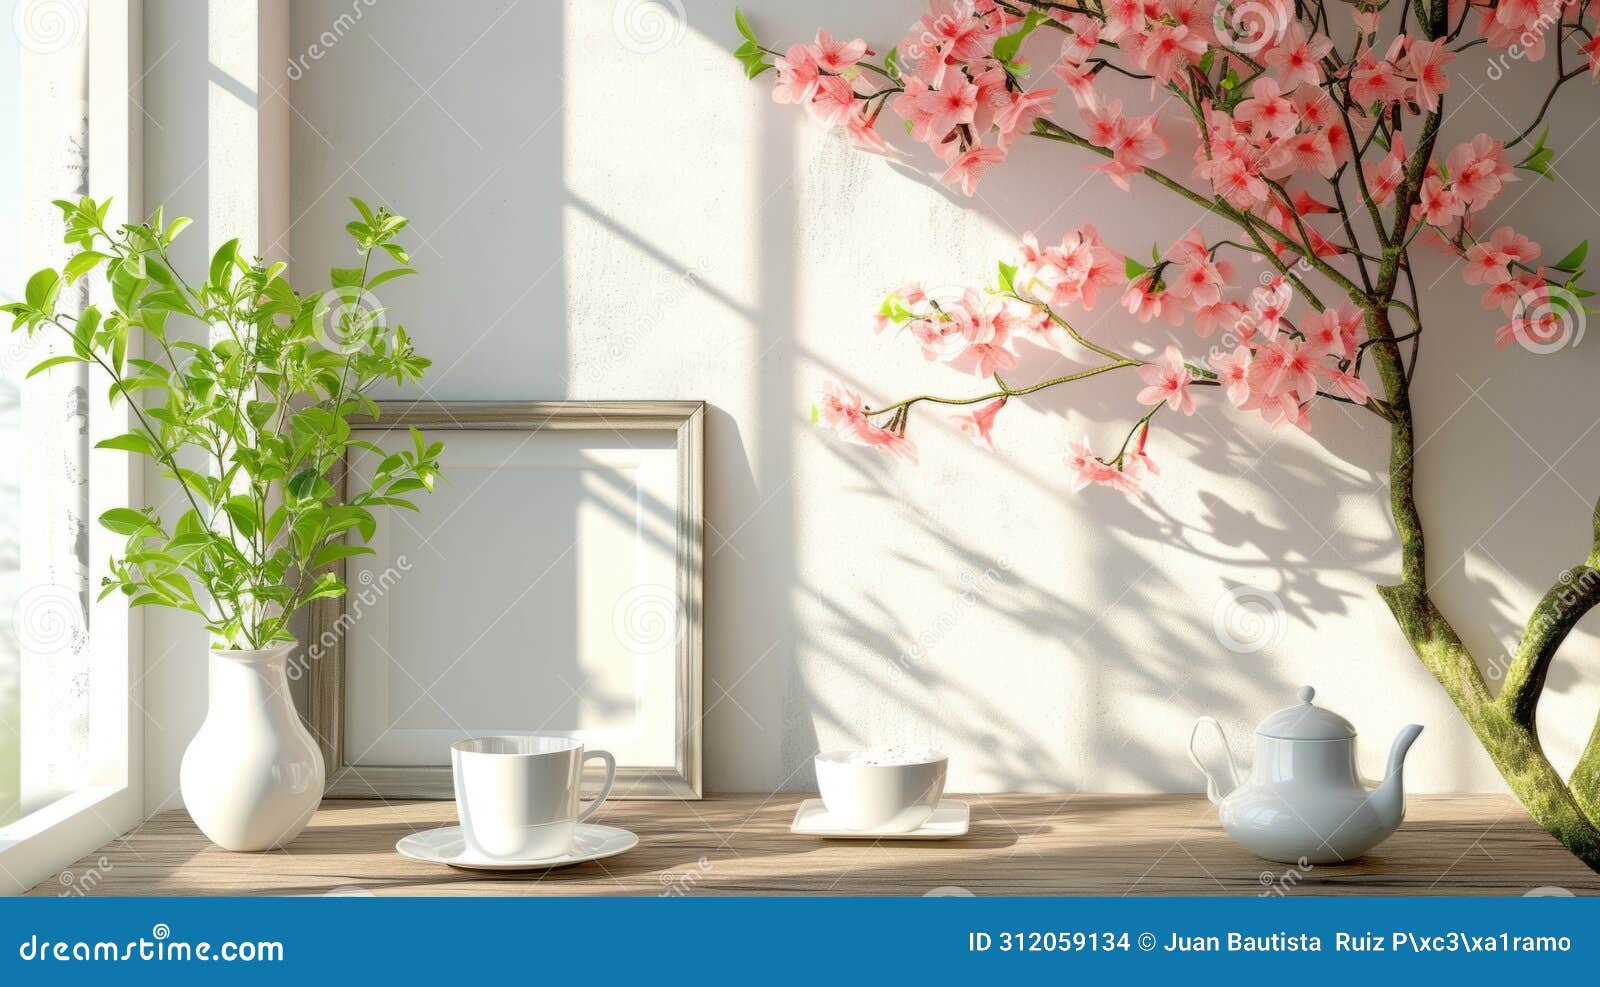 a mock-up of a blank menu or order card on a table with a tasteful tea set in a tranquil setting with soft sunlight.